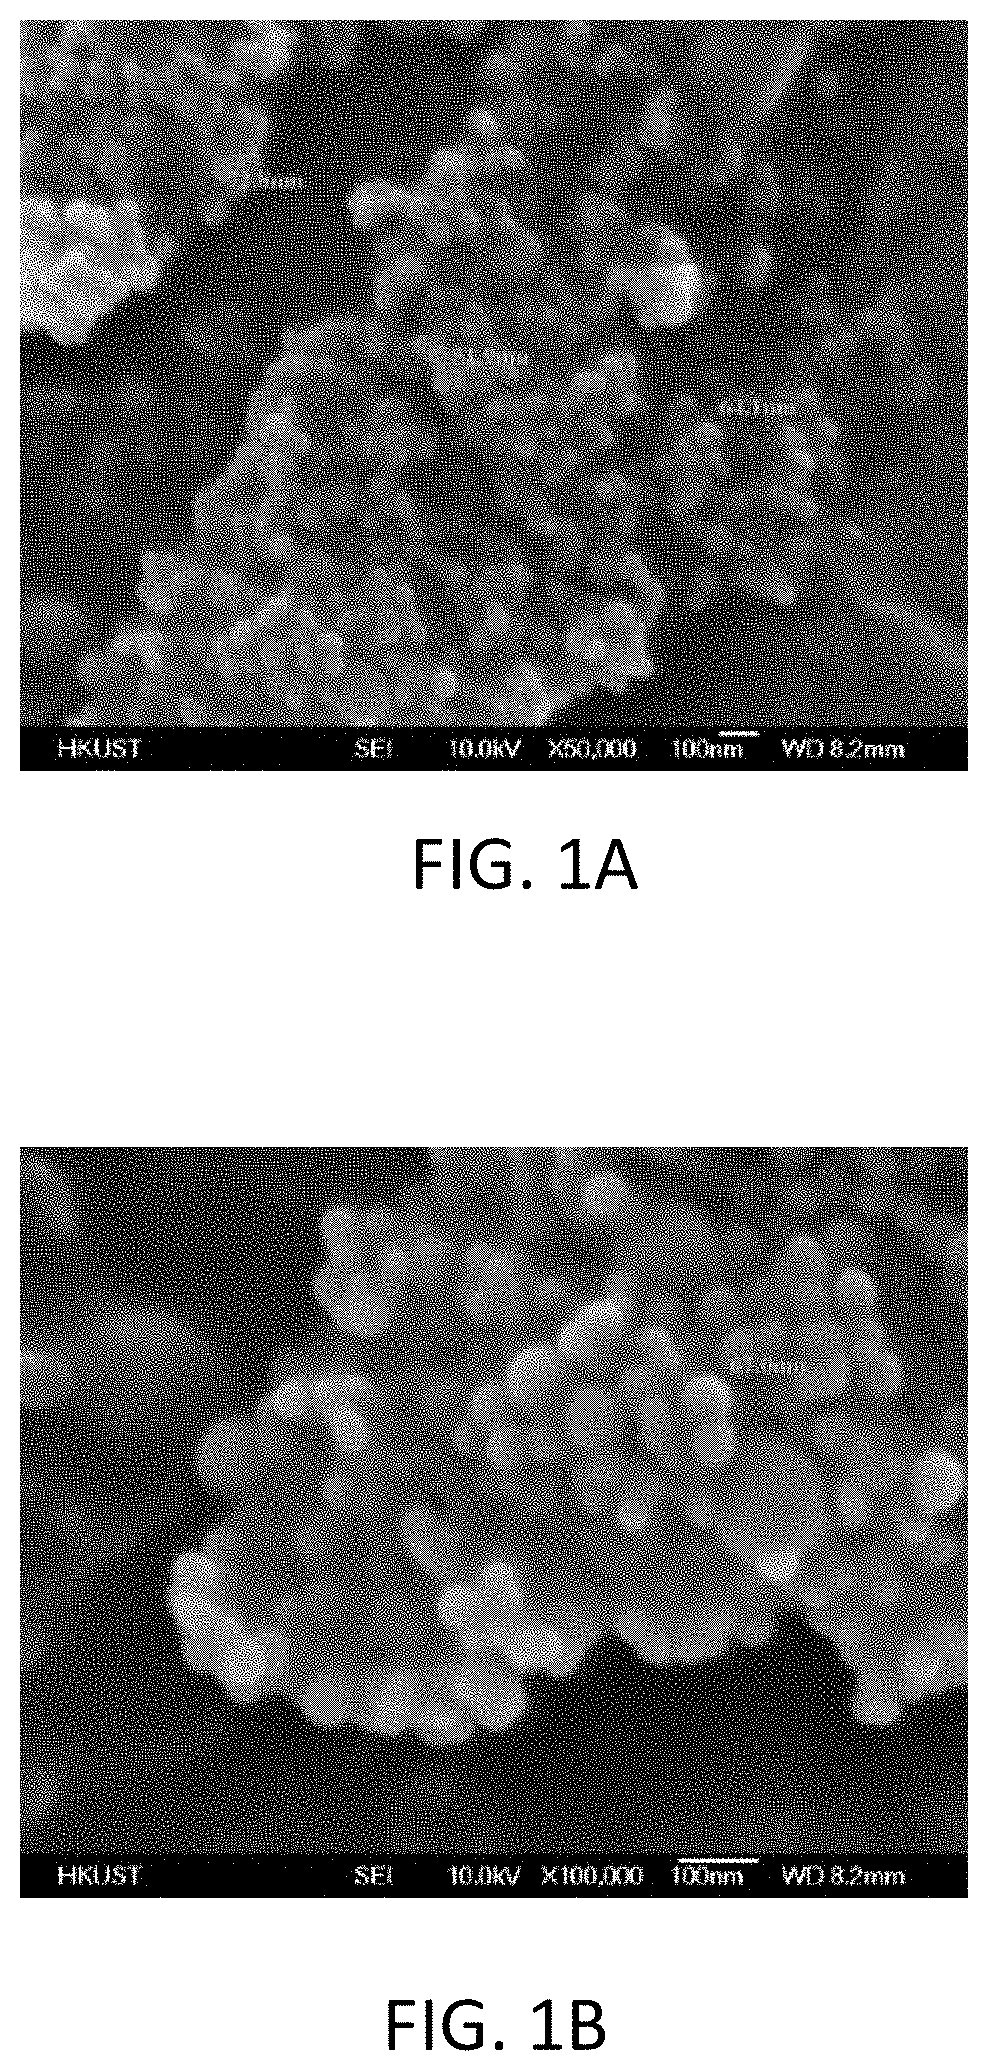 Burst-resistant, dispersible nano-encapsulated phase-change material and methods for preparing the same